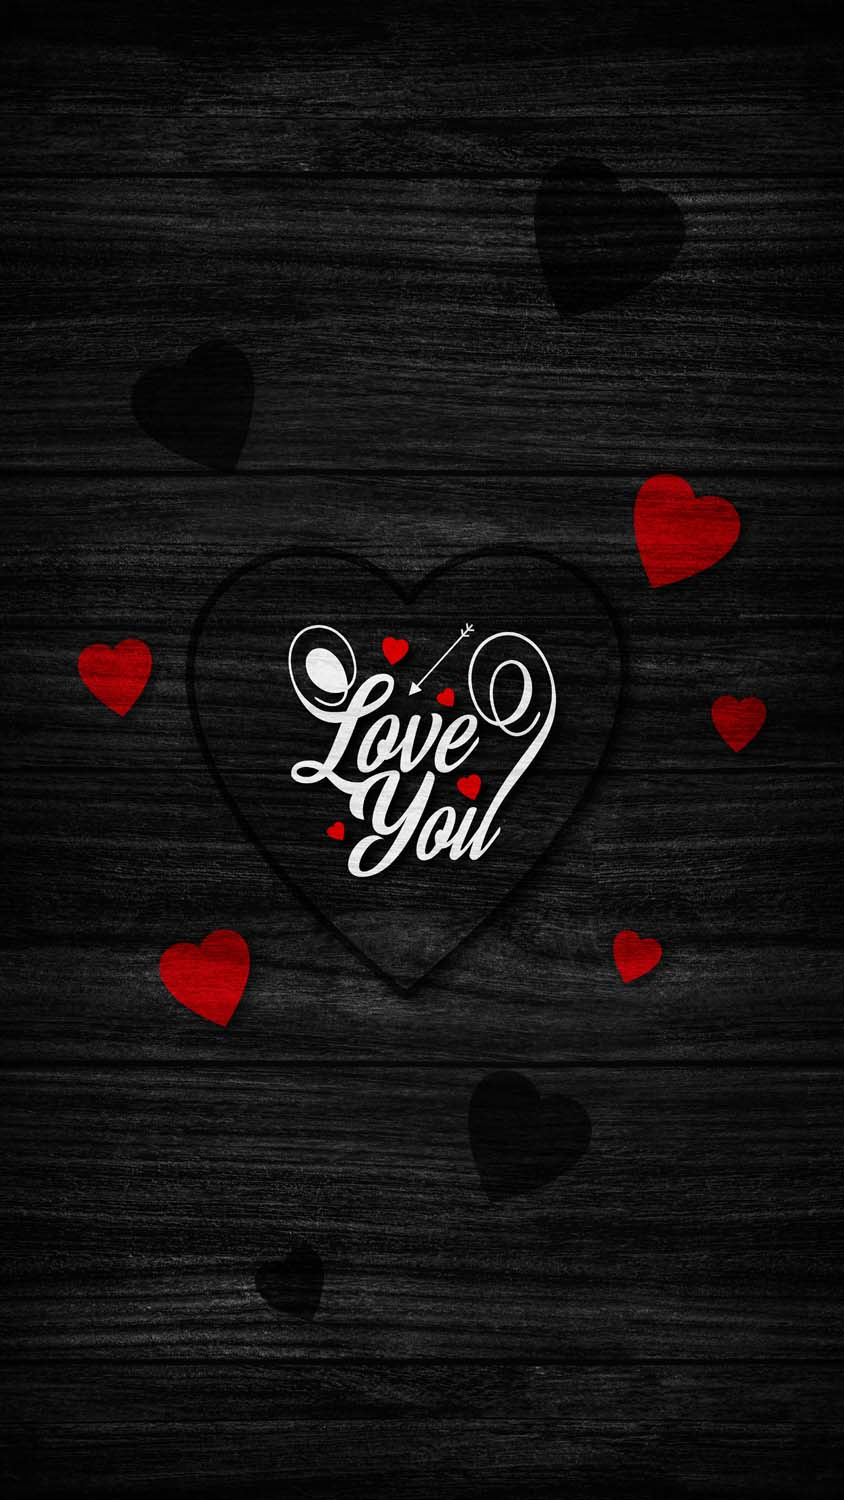 Download I love you wallpaper by rosemaria4111  53  Free on ZEDGE now  Browse millions   Love wallpaper download Love wallpapers romantic I  love you pictures